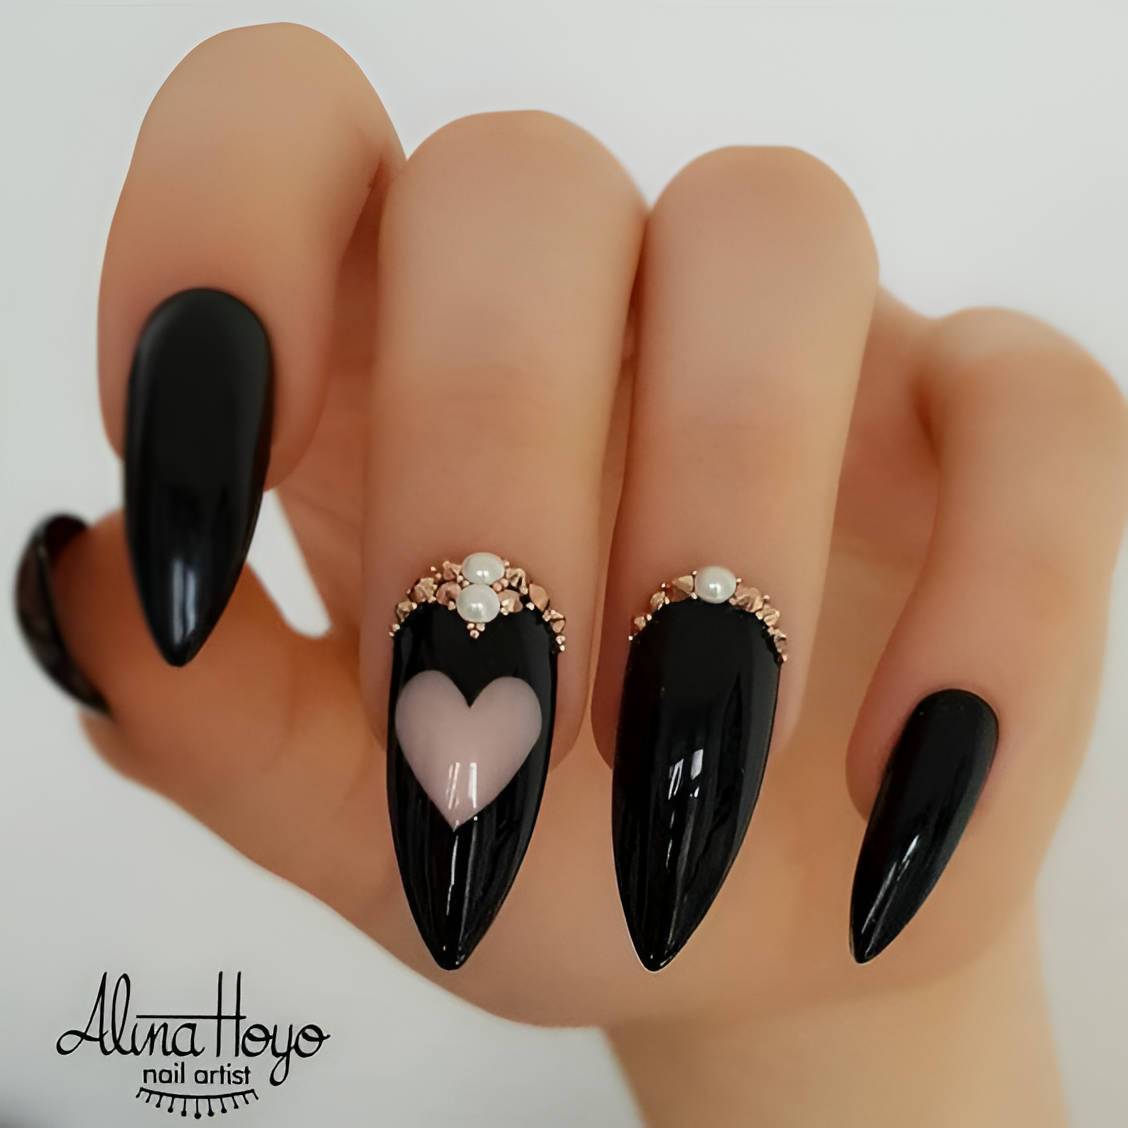 Stunning Stiletto Nail Designs Nobody Can Resist - 201